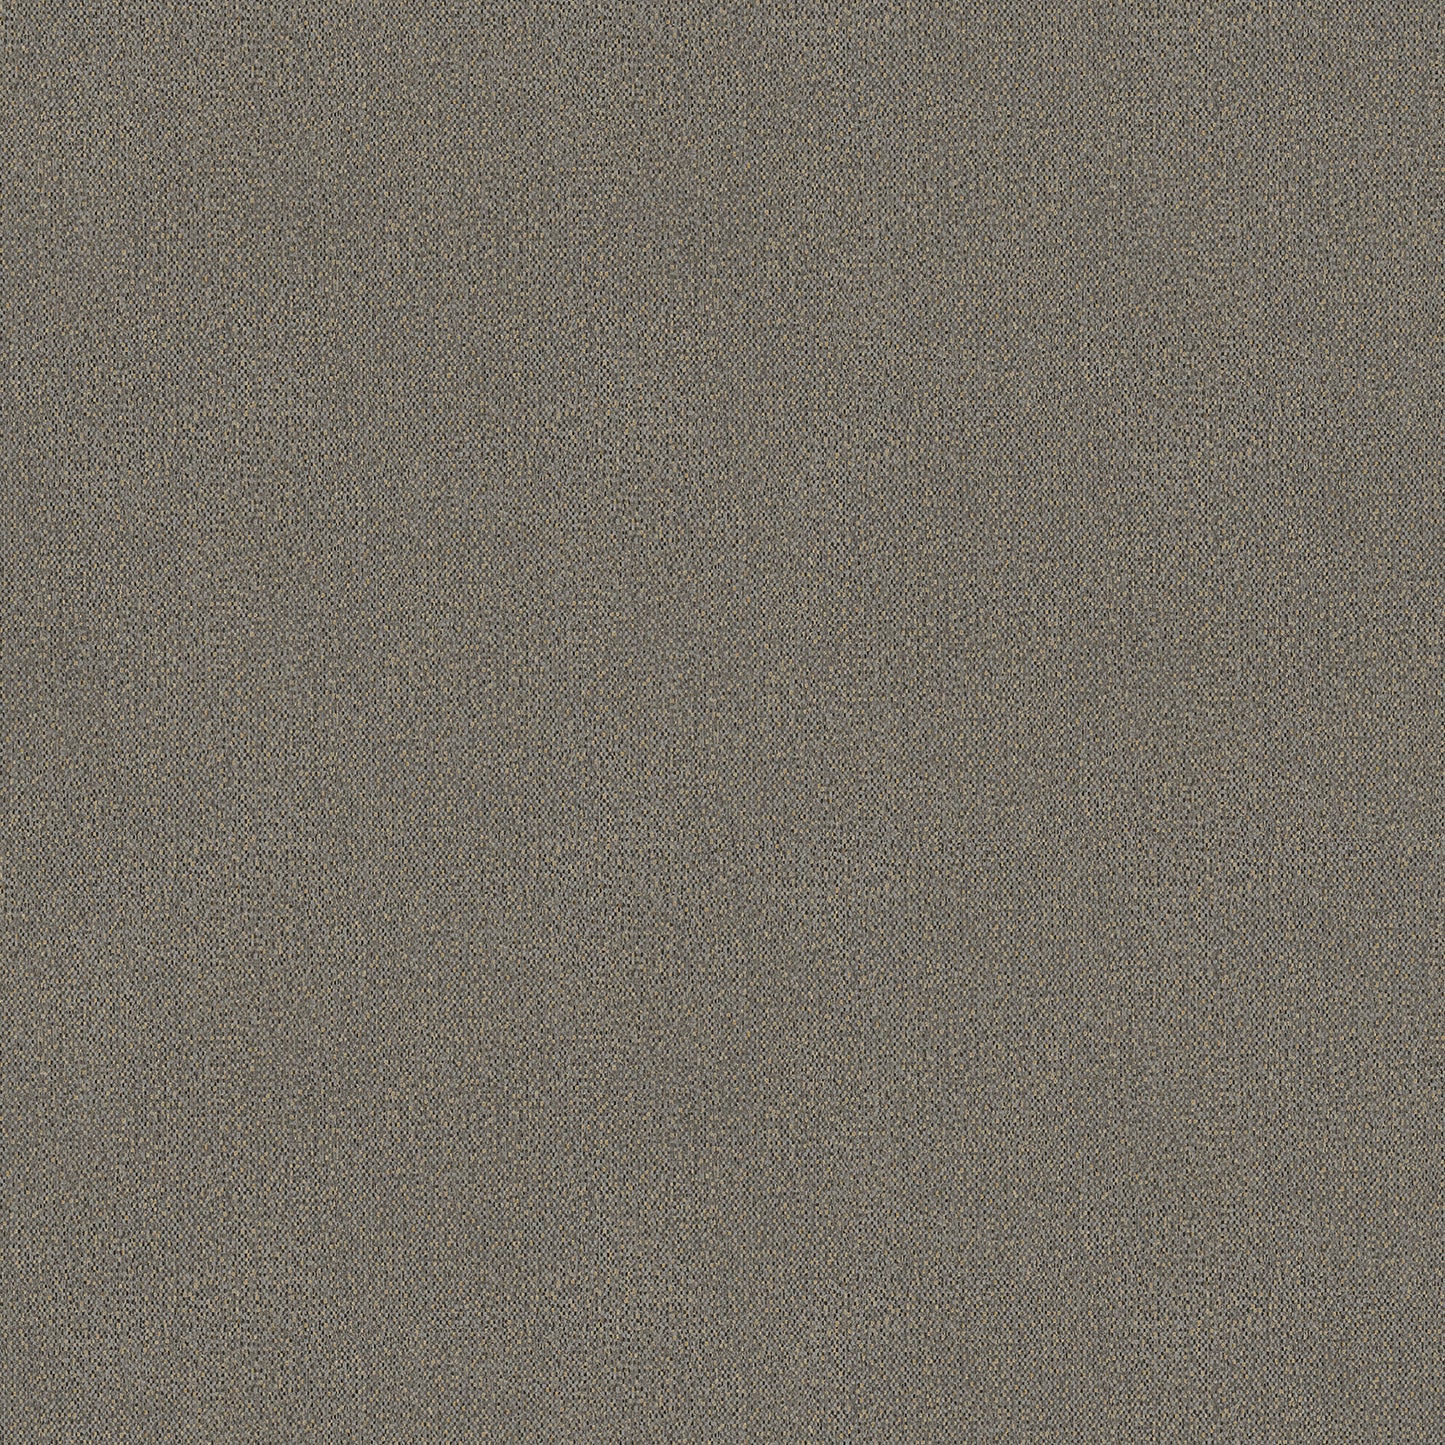 Select 2979-37374-1 Bali Hanalei Brown Distressed Abstract Texture Brown by Advantage Wallpaper